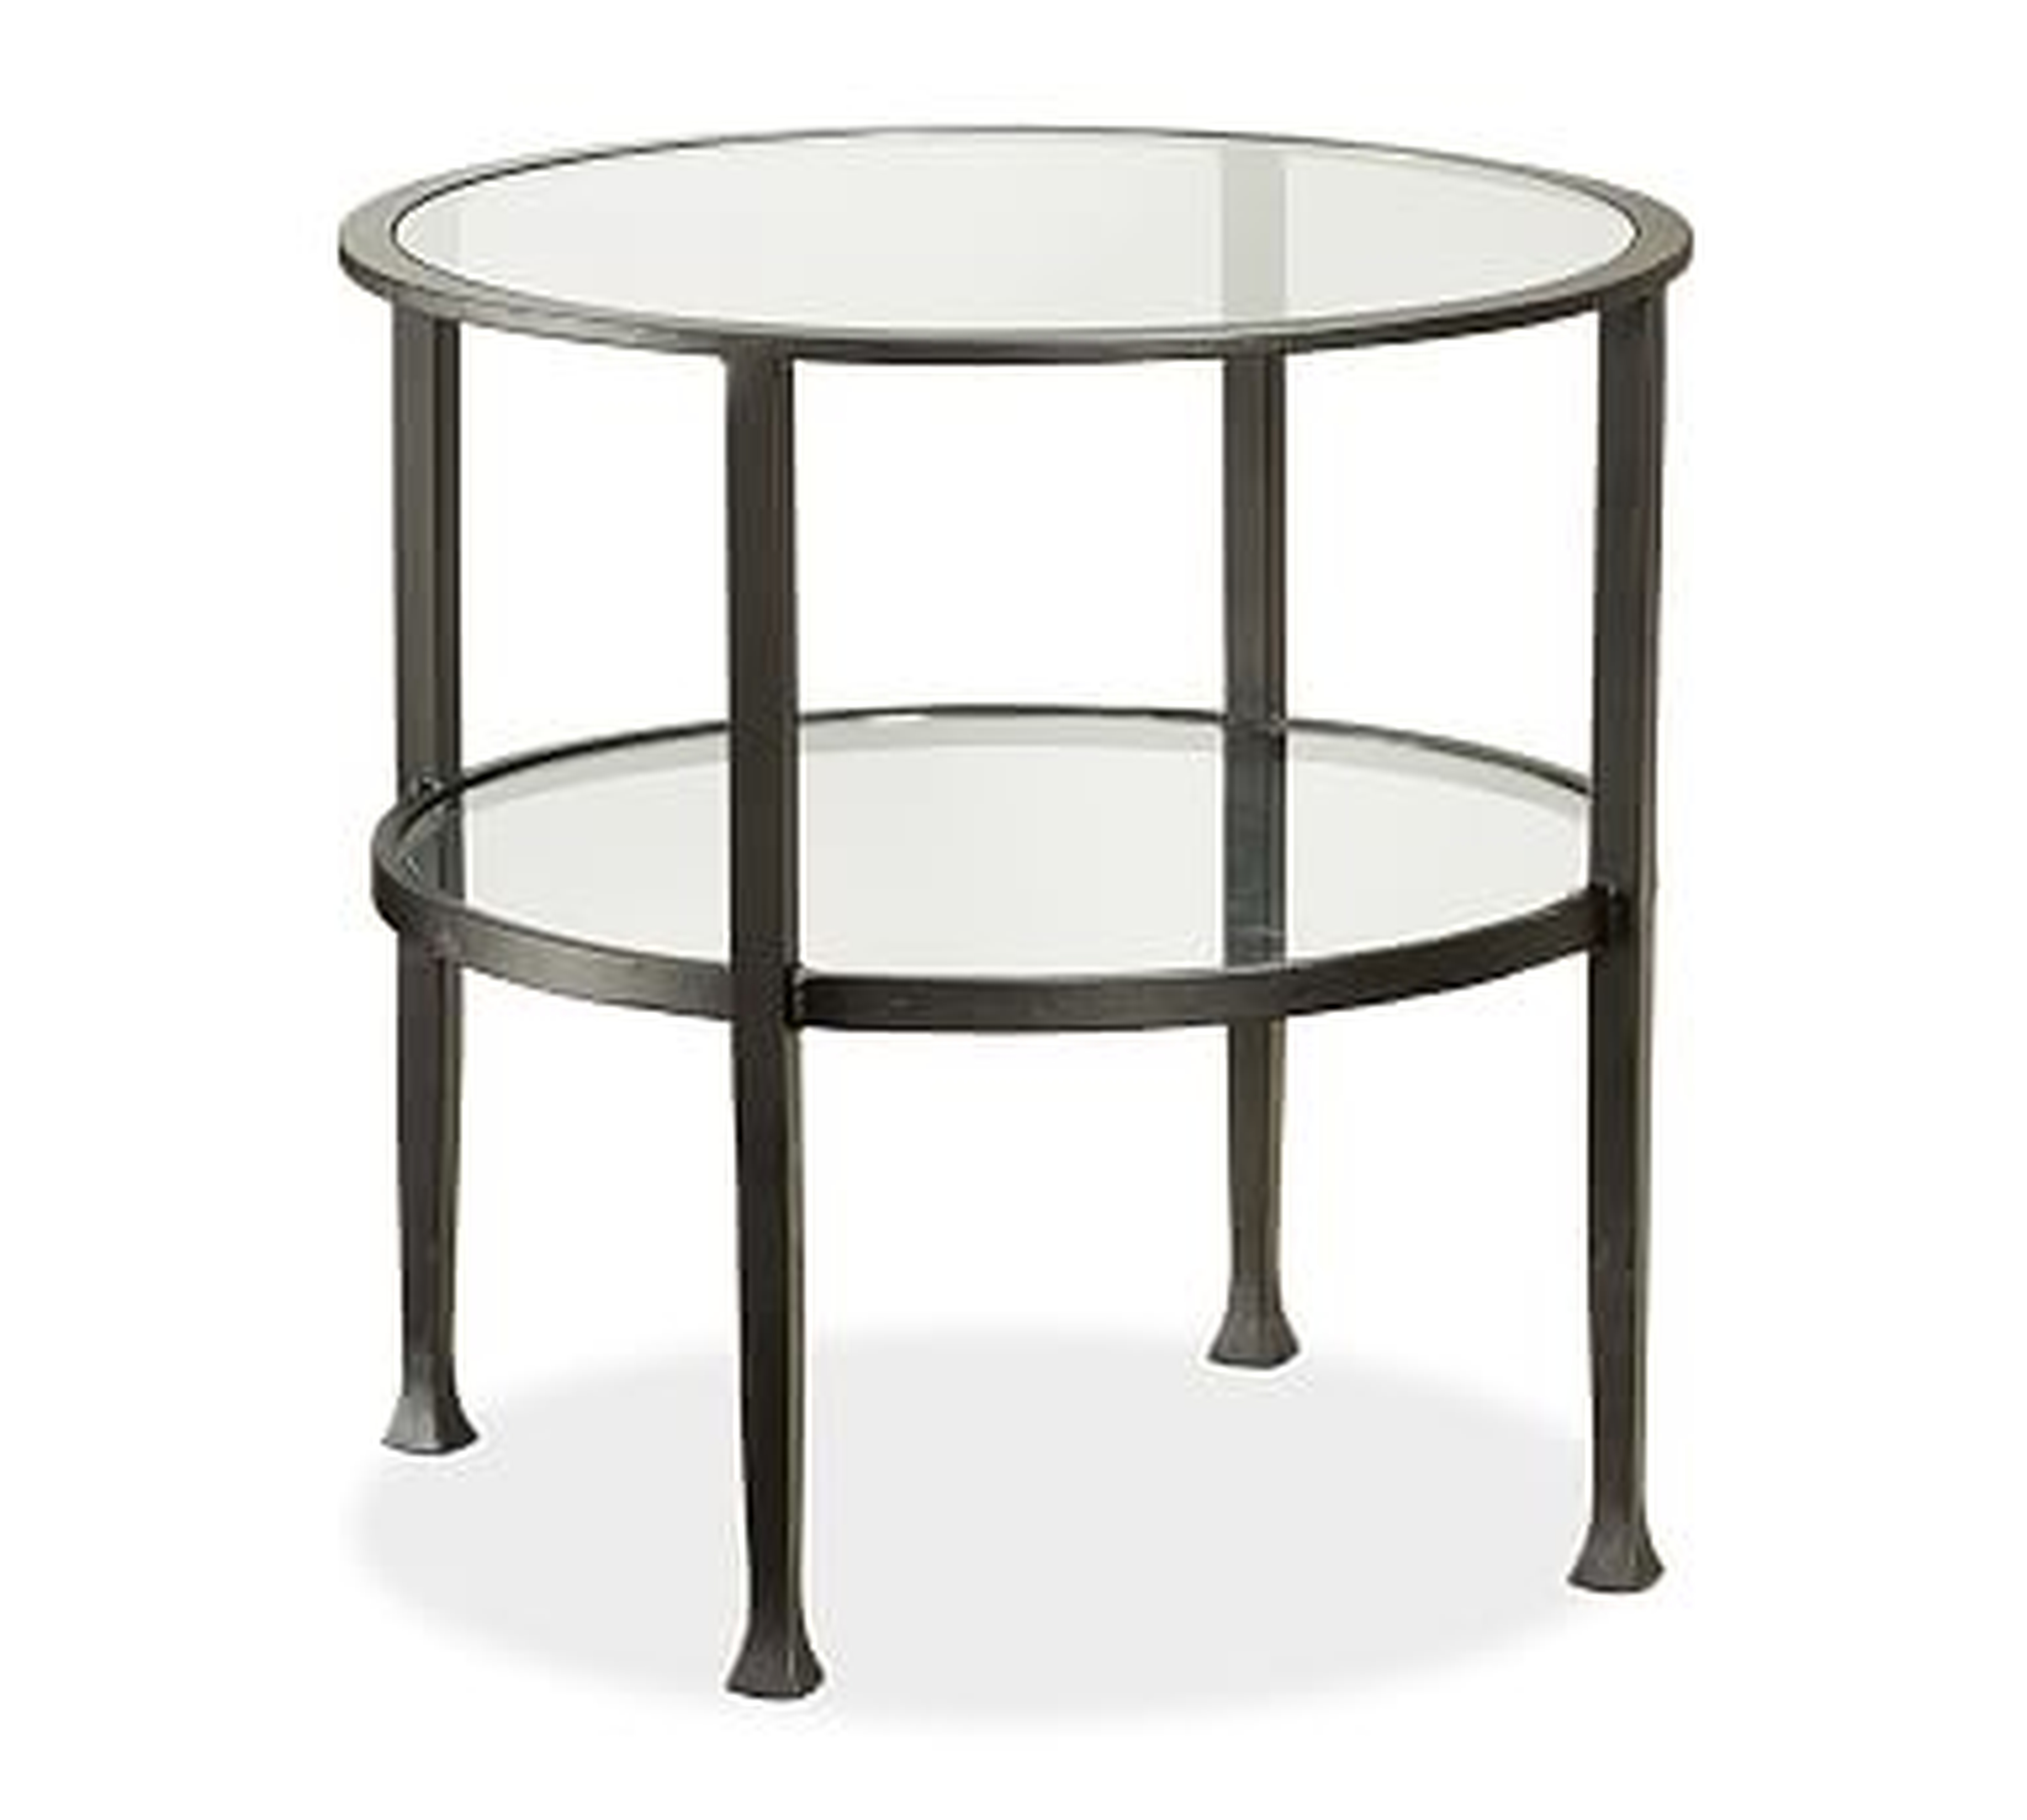 Tanner Metal & Glass Round End Table, Blackened Bronze - Pottery Barn